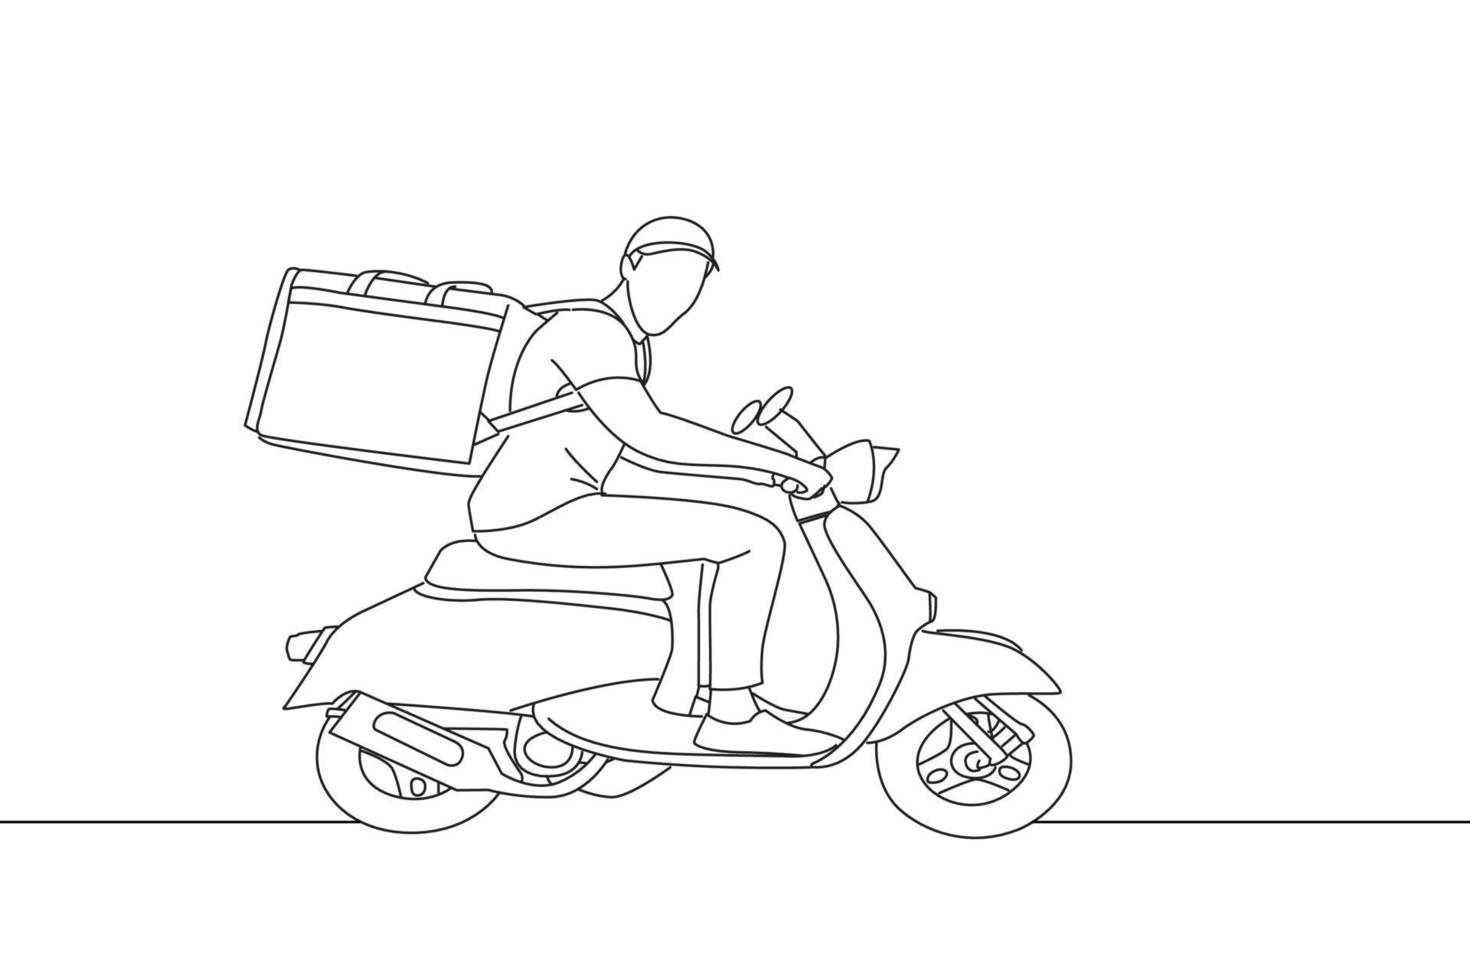 Illustration of delivery man riding motorcycle using backpack contain package box parcel. Outline drawing style art vector